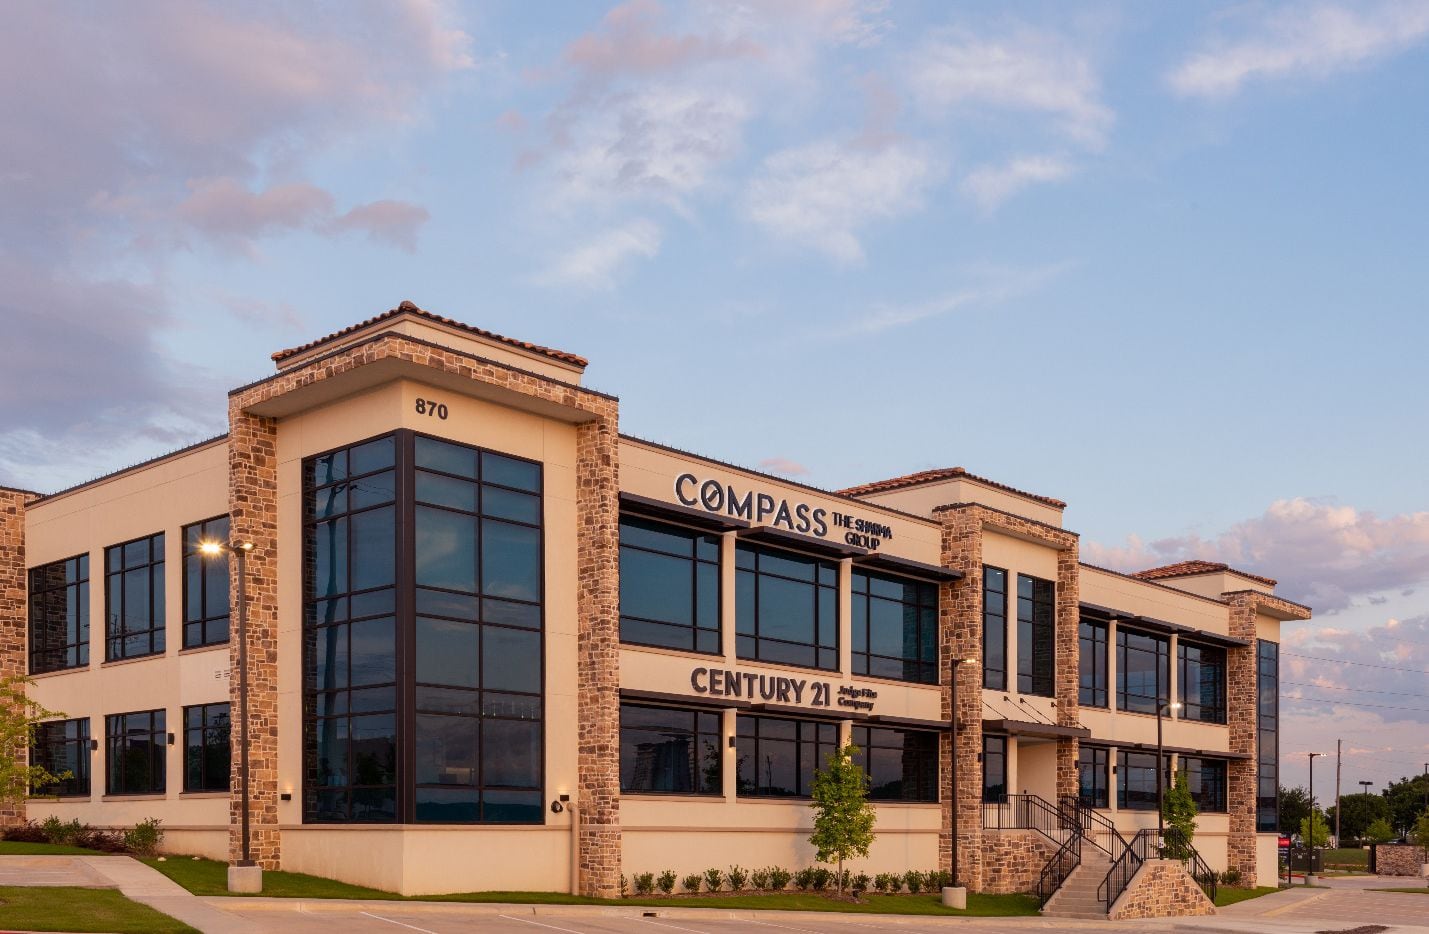 Lakeside Professional Office located in Flower Mound was developed by Realty Capital Mangement.